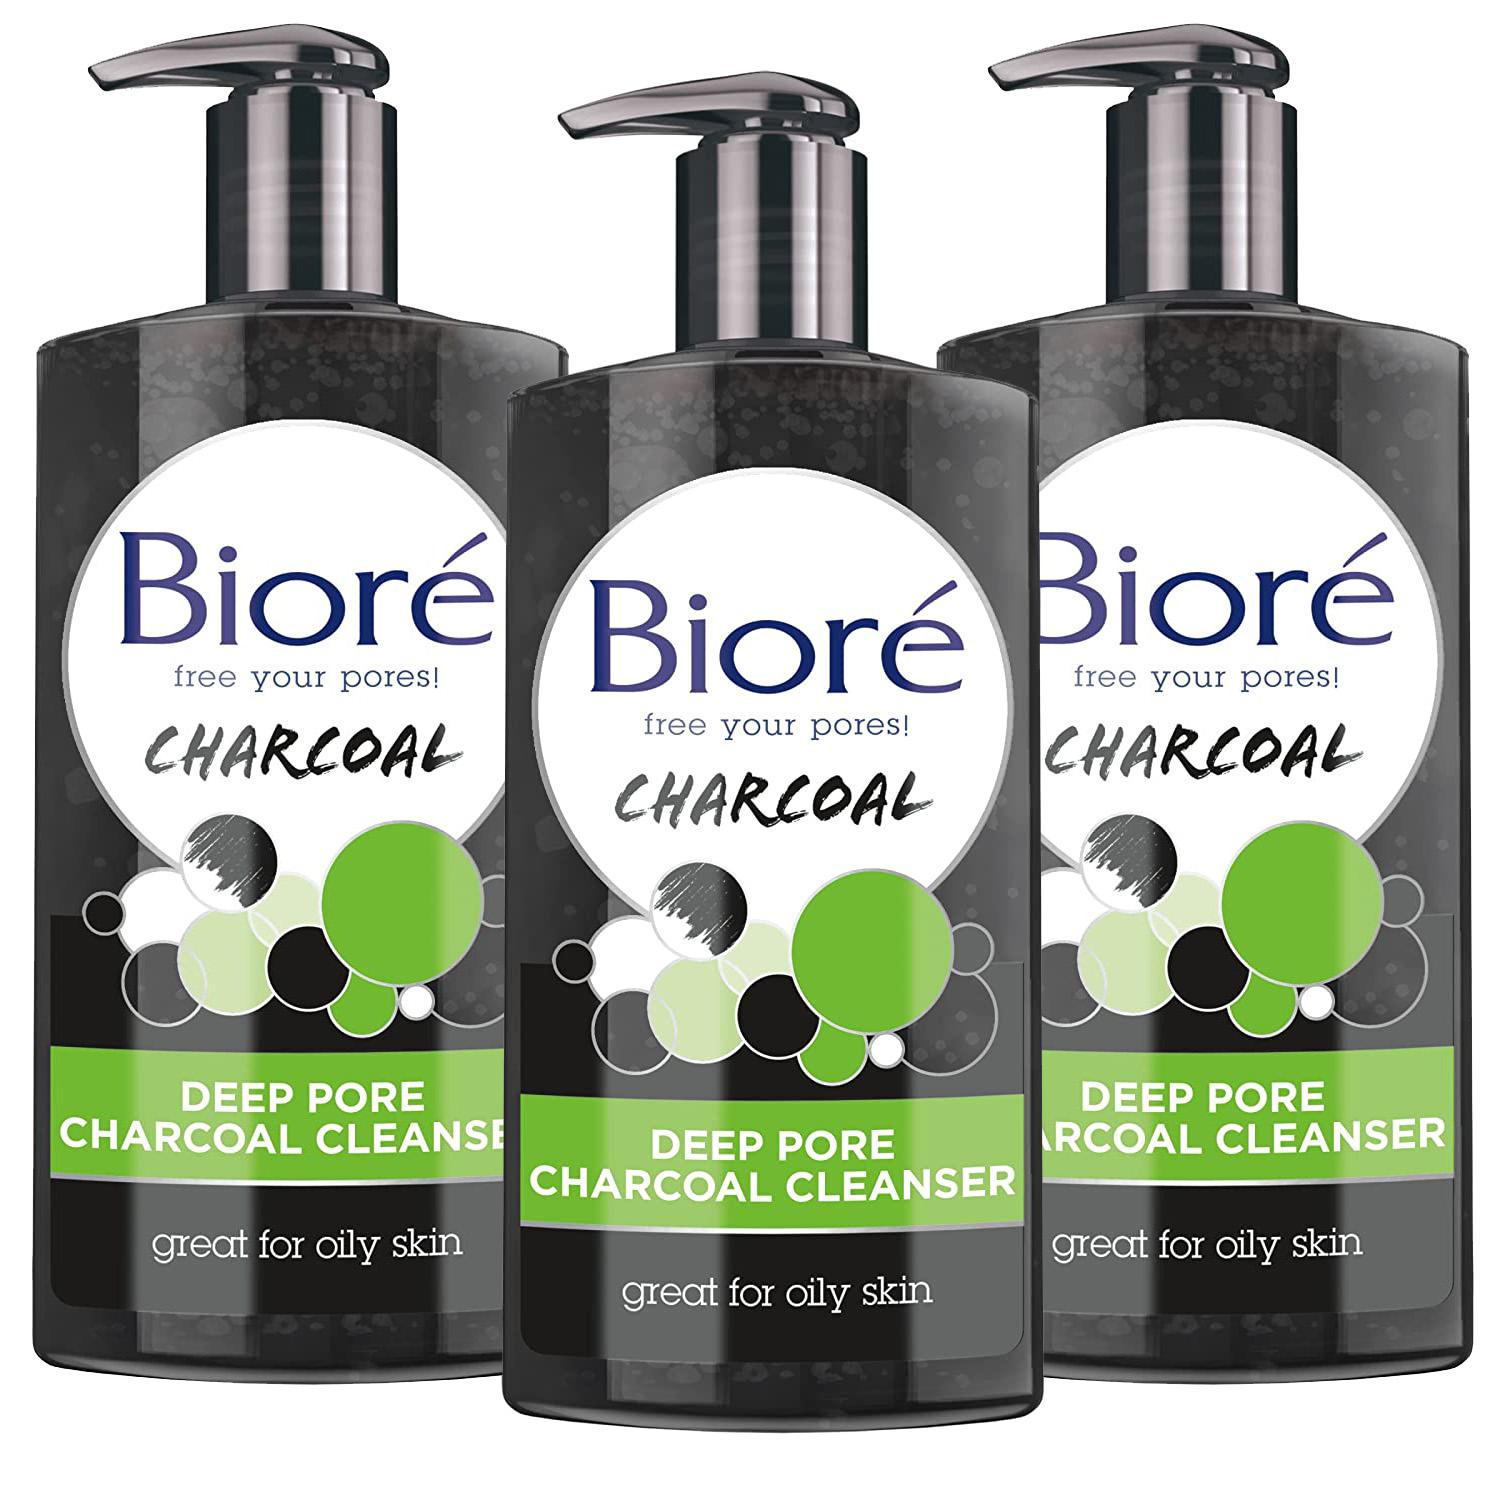 Biore Deep Pore Charcoal Face Wash 3 Pack for $11.68 Shipped